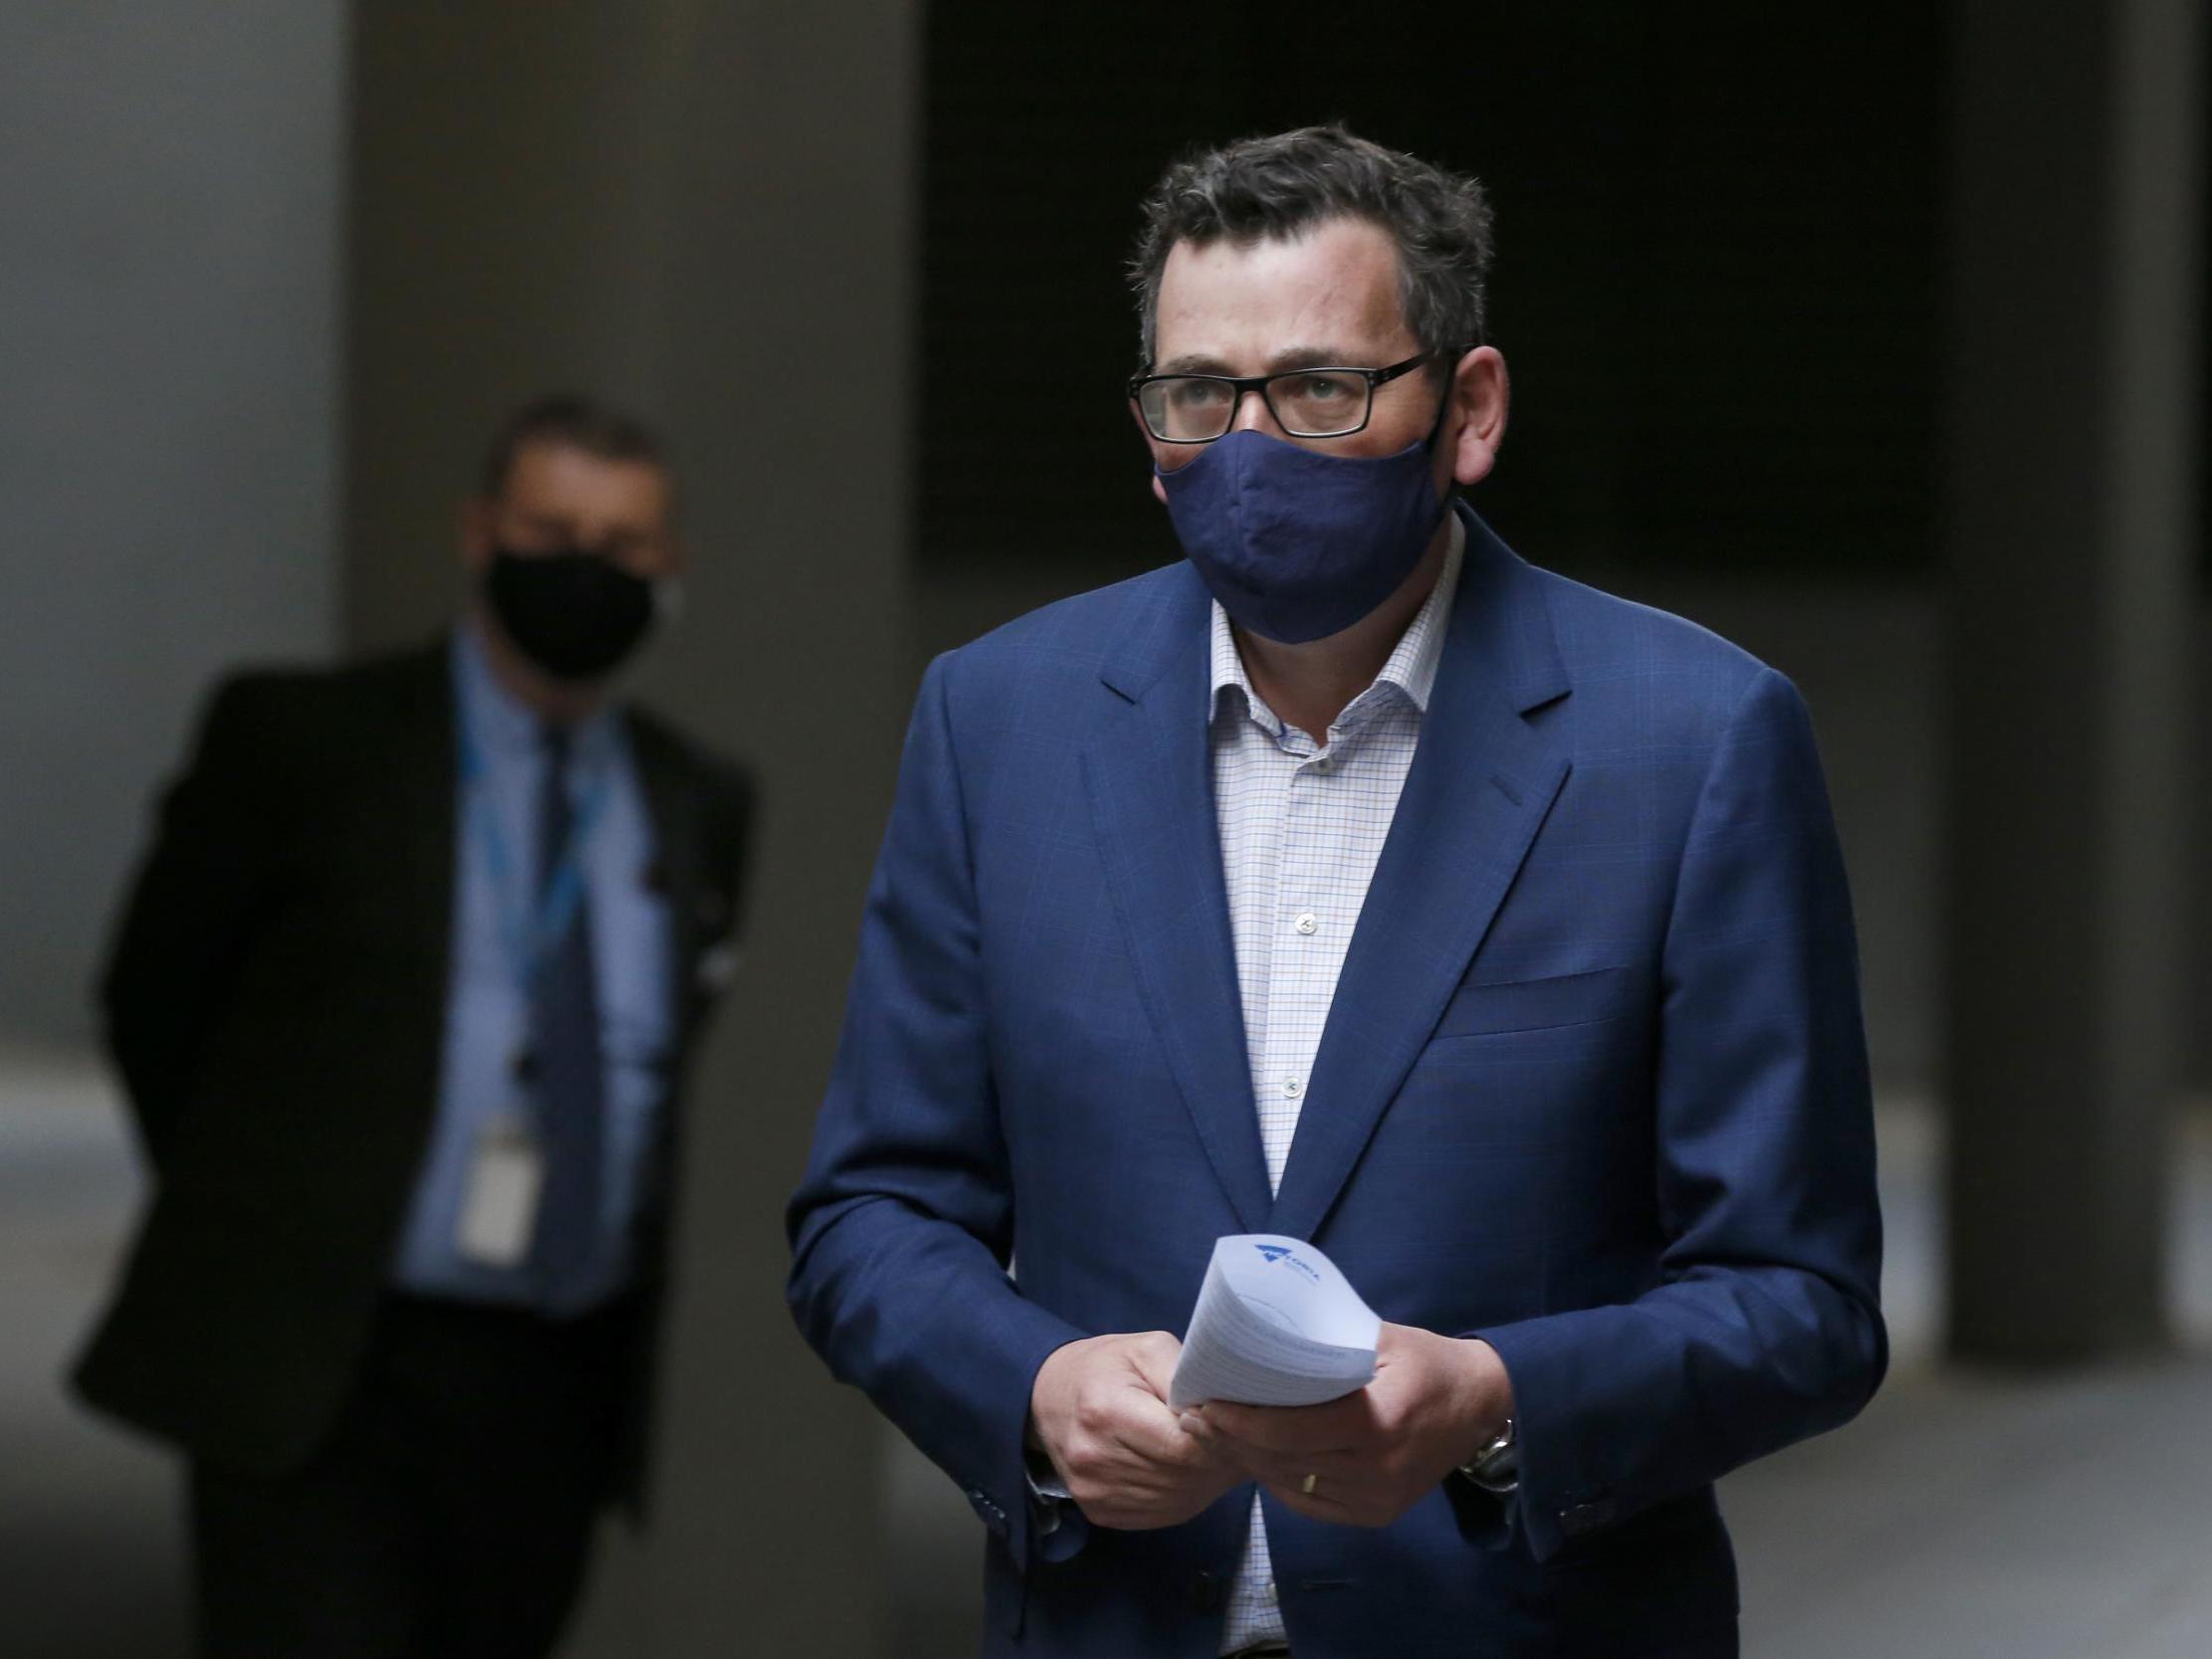 Victoria Premier Daniel Andrews arrives at the daily briefing in Melbourne, Australia